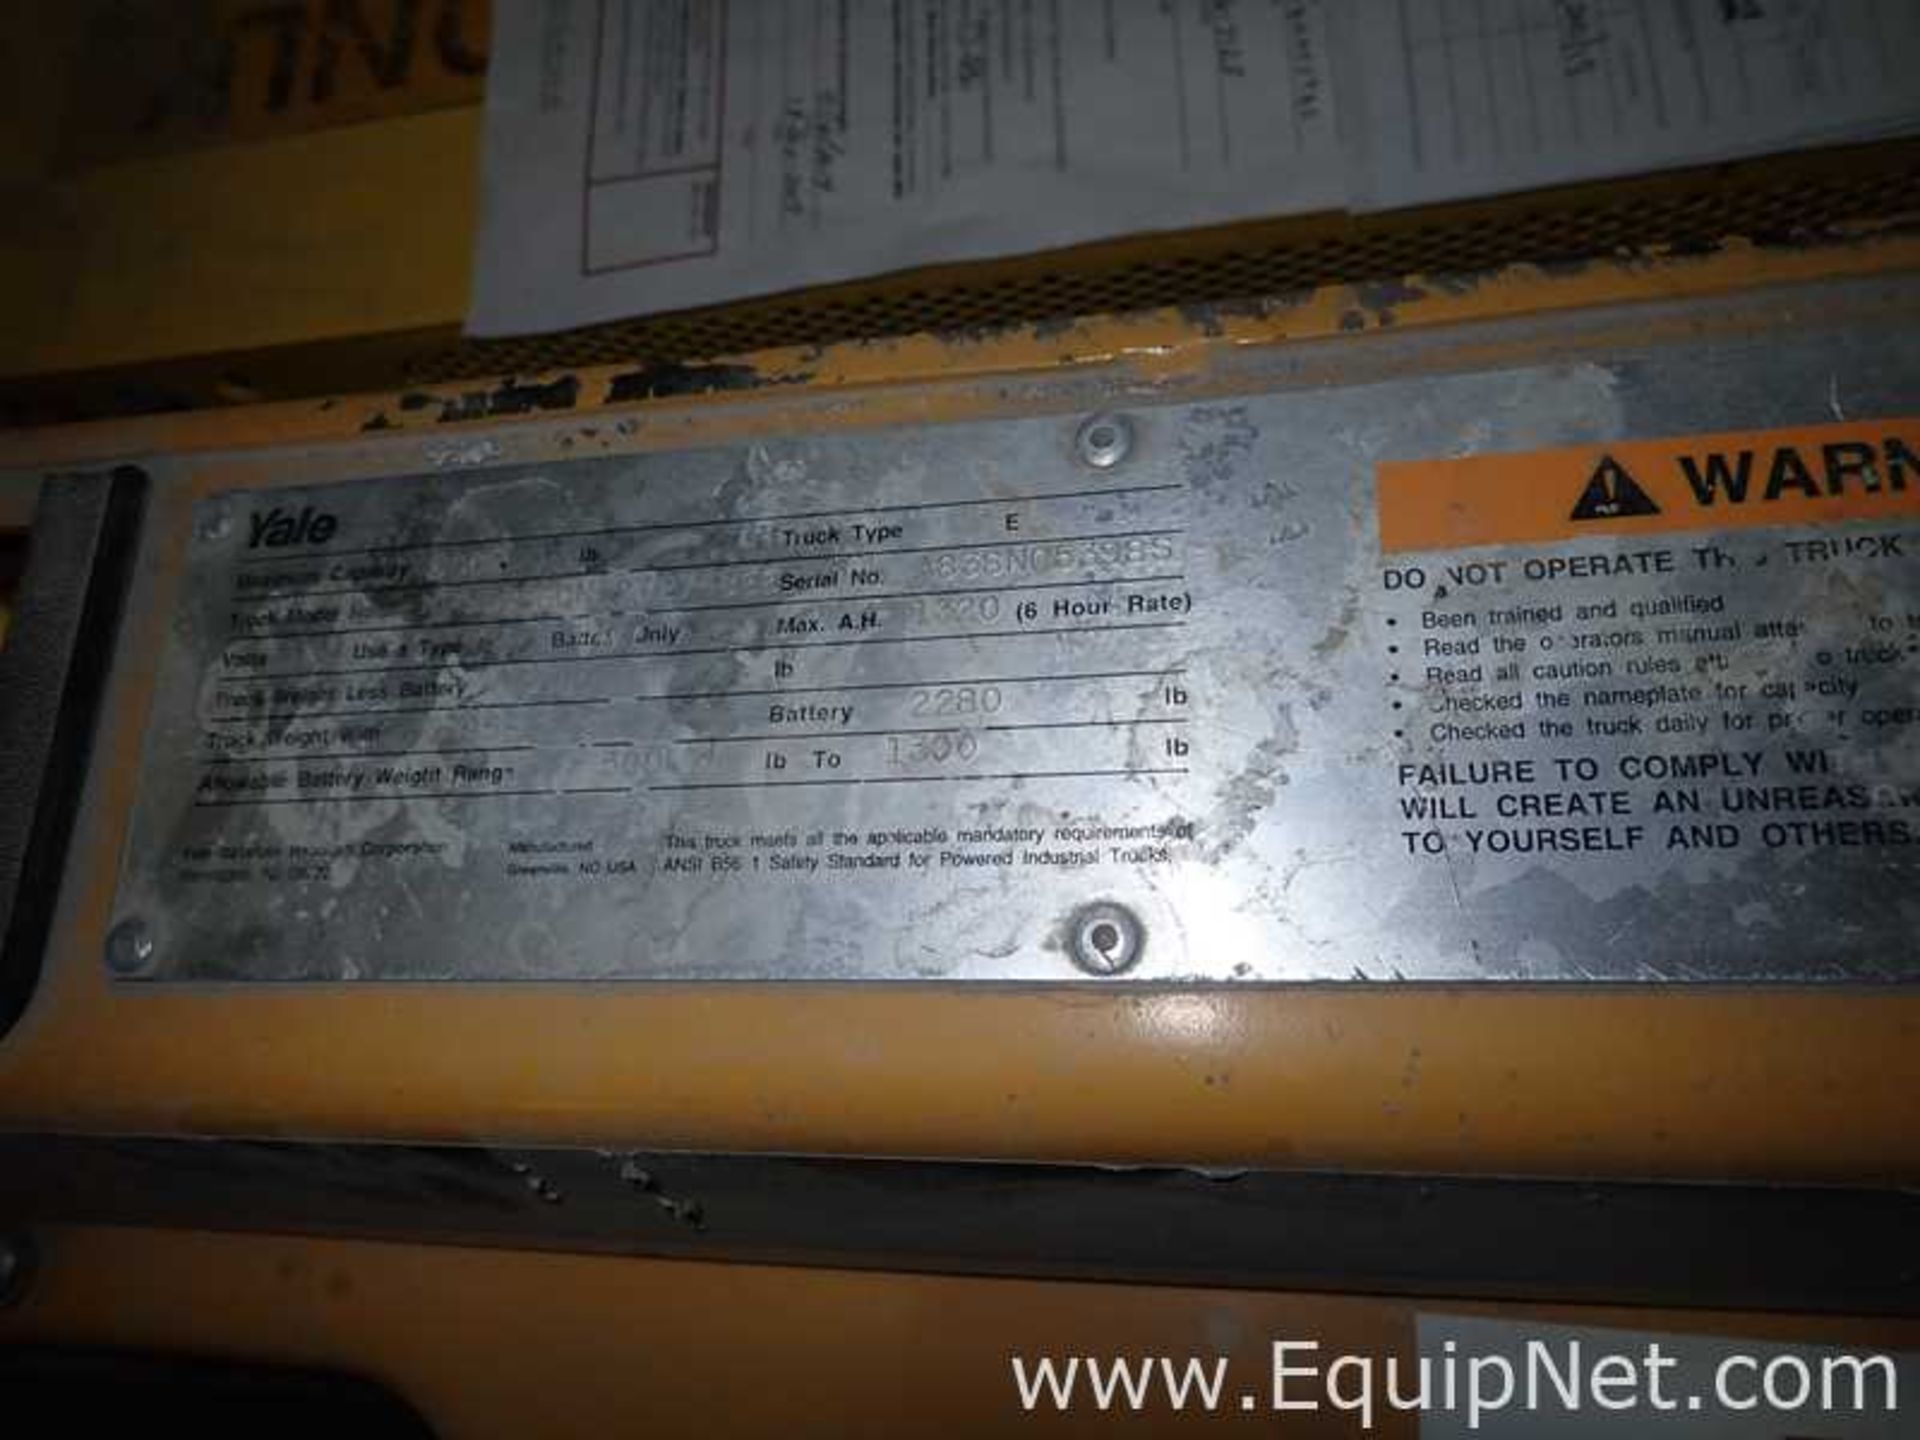 EQUIPNET LISTING #605035; REMOVAL COST: $50; MODEL: MPW060SCN12T2748EE; DESCRIPTION: Yale - Image 4 of 7